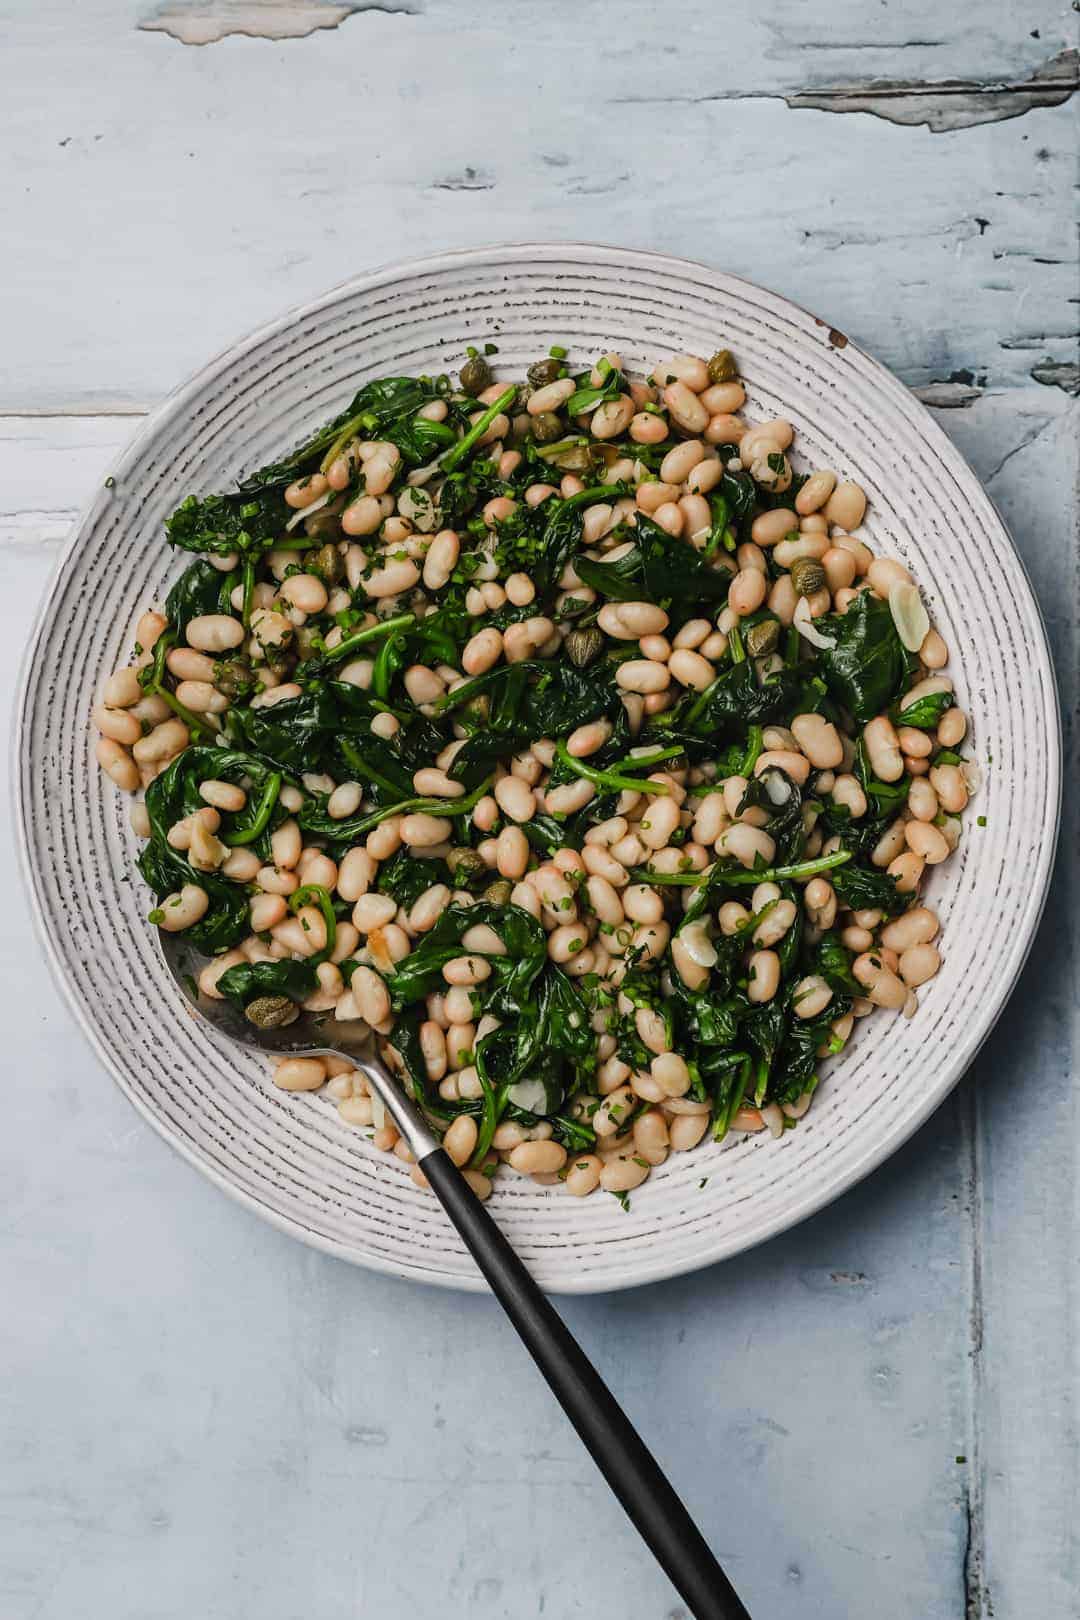 10-Minute Garlic Spinach and White Beans